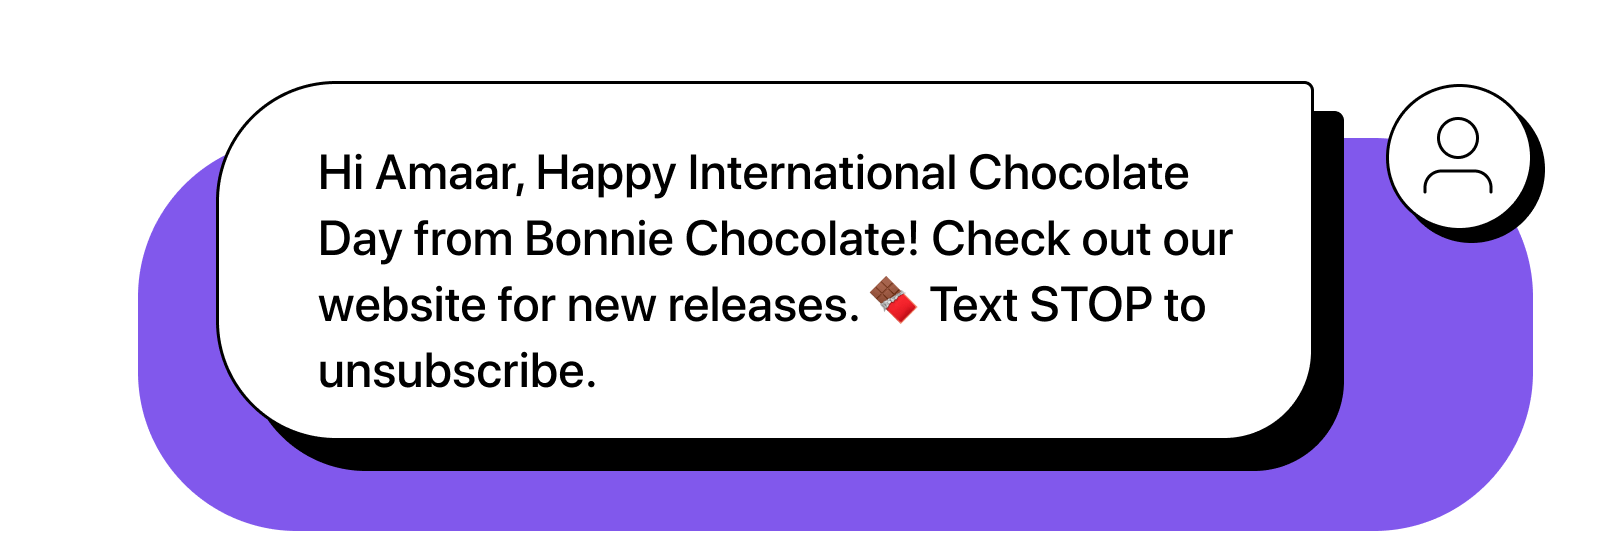 SMS reading: Hi Amaar, Happy International Chocolate Day from Bonnie Chocolate! Check out our website for new releases. 🍫 Text STOP to unsubscribe.